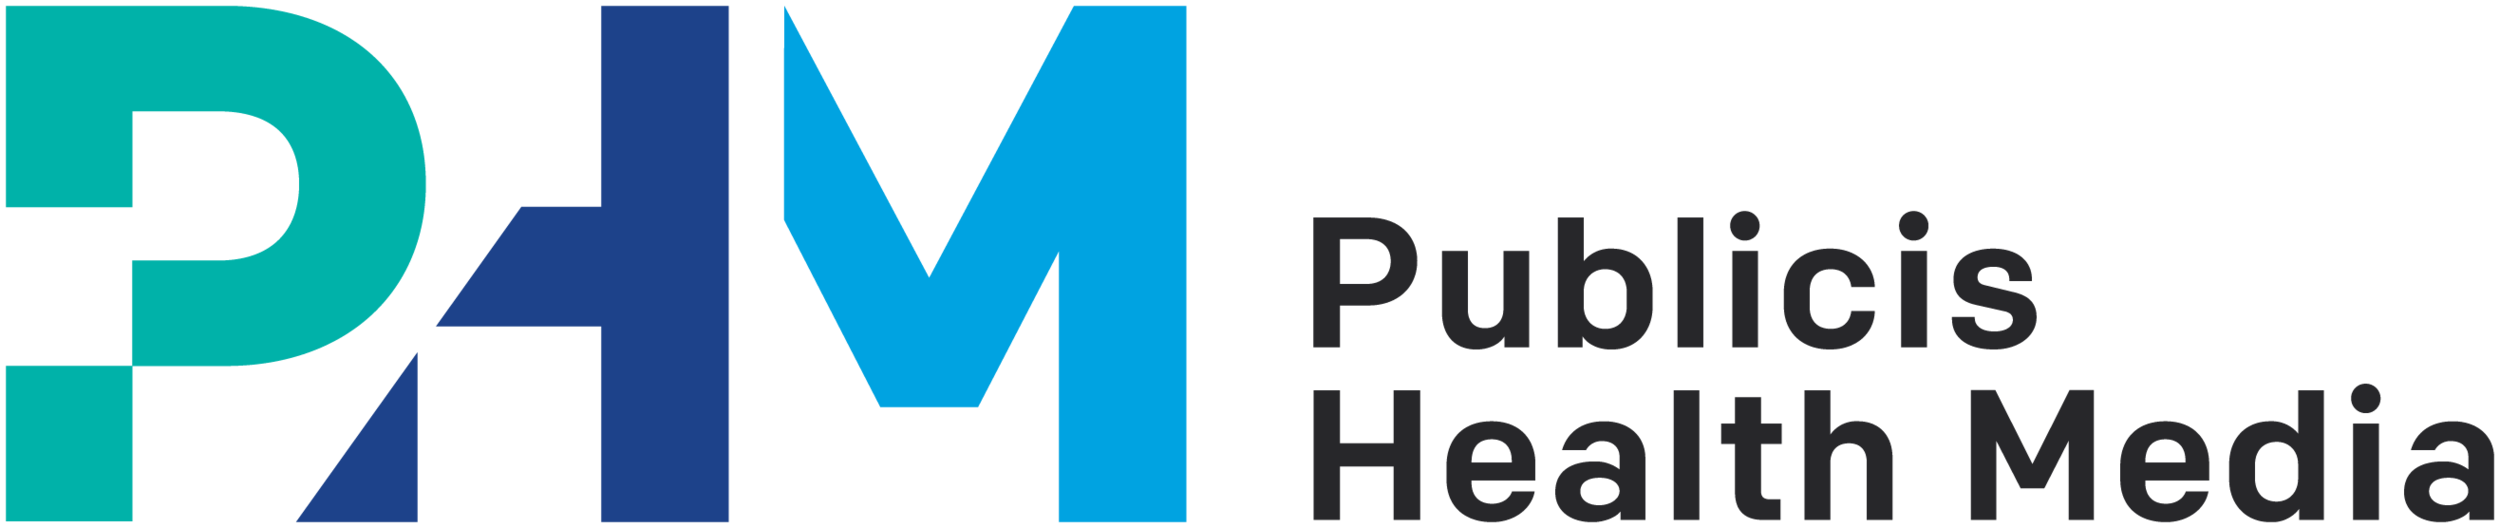 phm-primary-logo-full-color-rgb.png